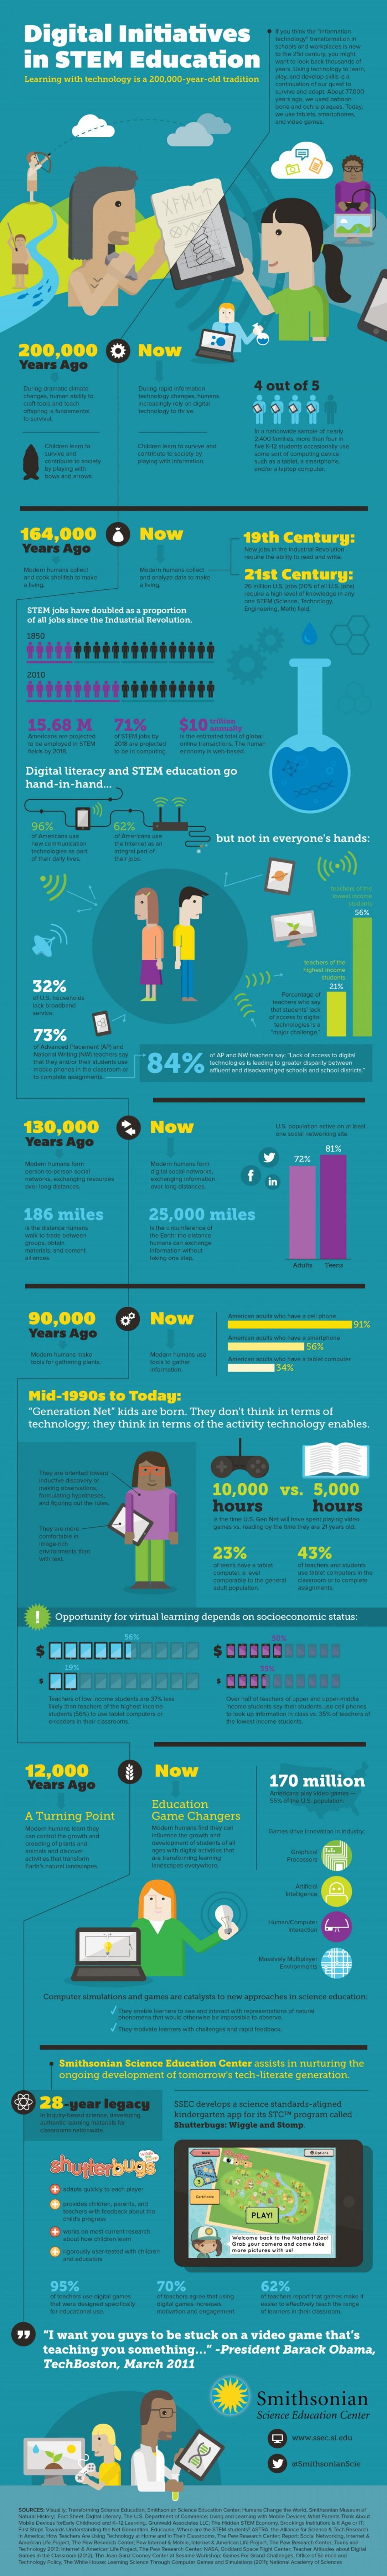 Learning-with-technology-is-an-old-tradition-infographic